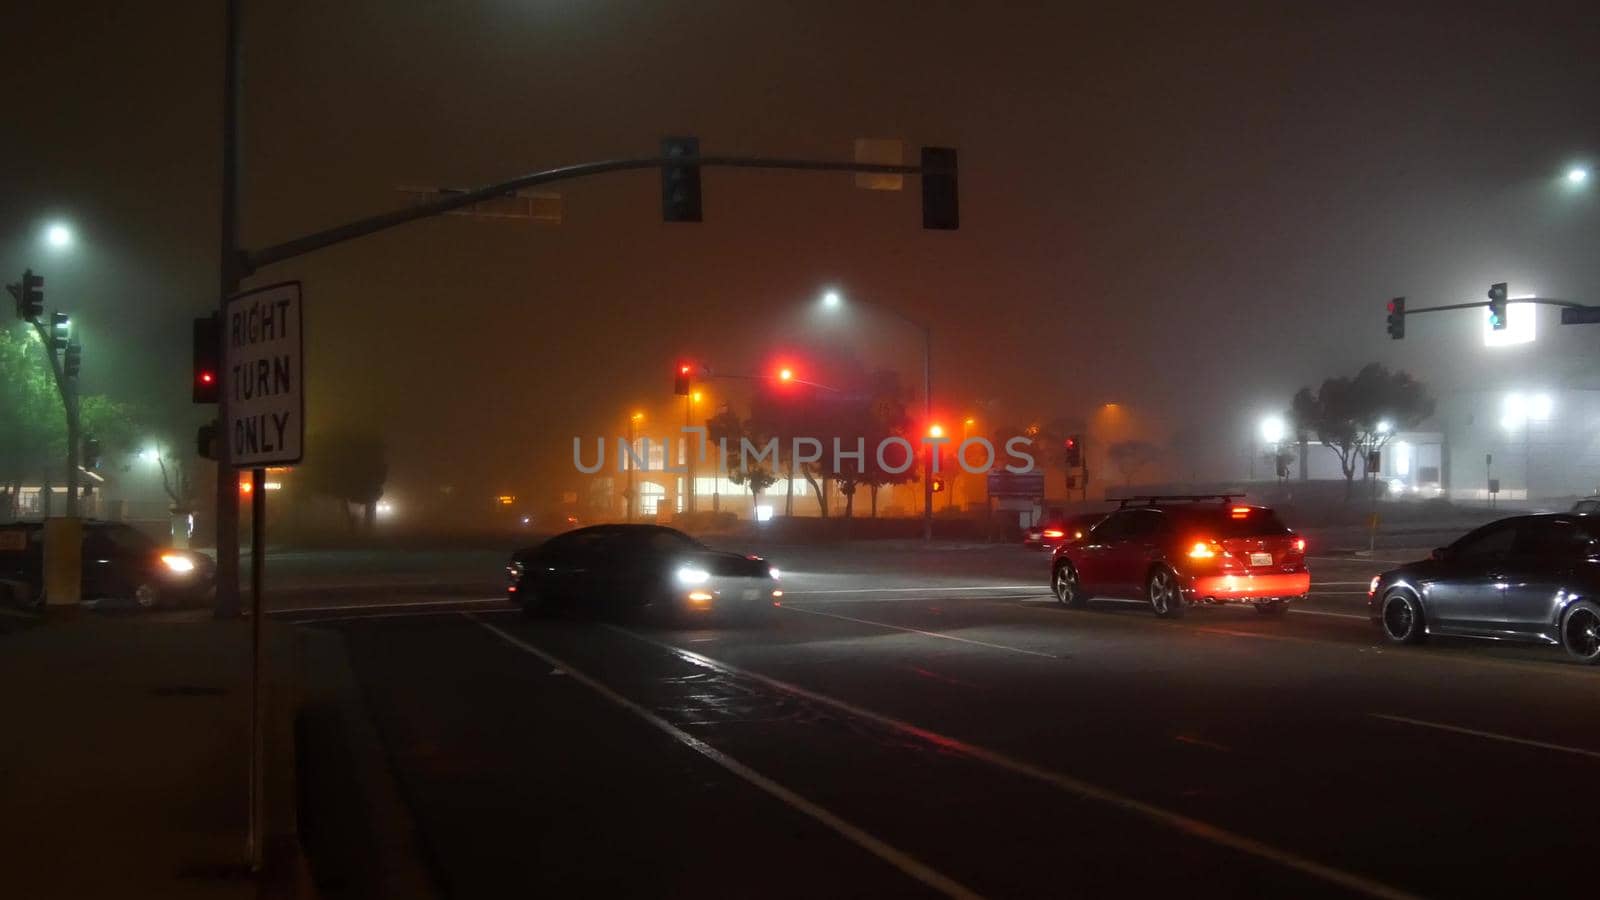 VISTA, CALIFORNIA USA - 24 JAN 2020: Marine layer, dense fog on driveway crossroad at night. June gloom, misty nebulous bad weather. Dangerous low visibility on road intersection. Car traffic safety.